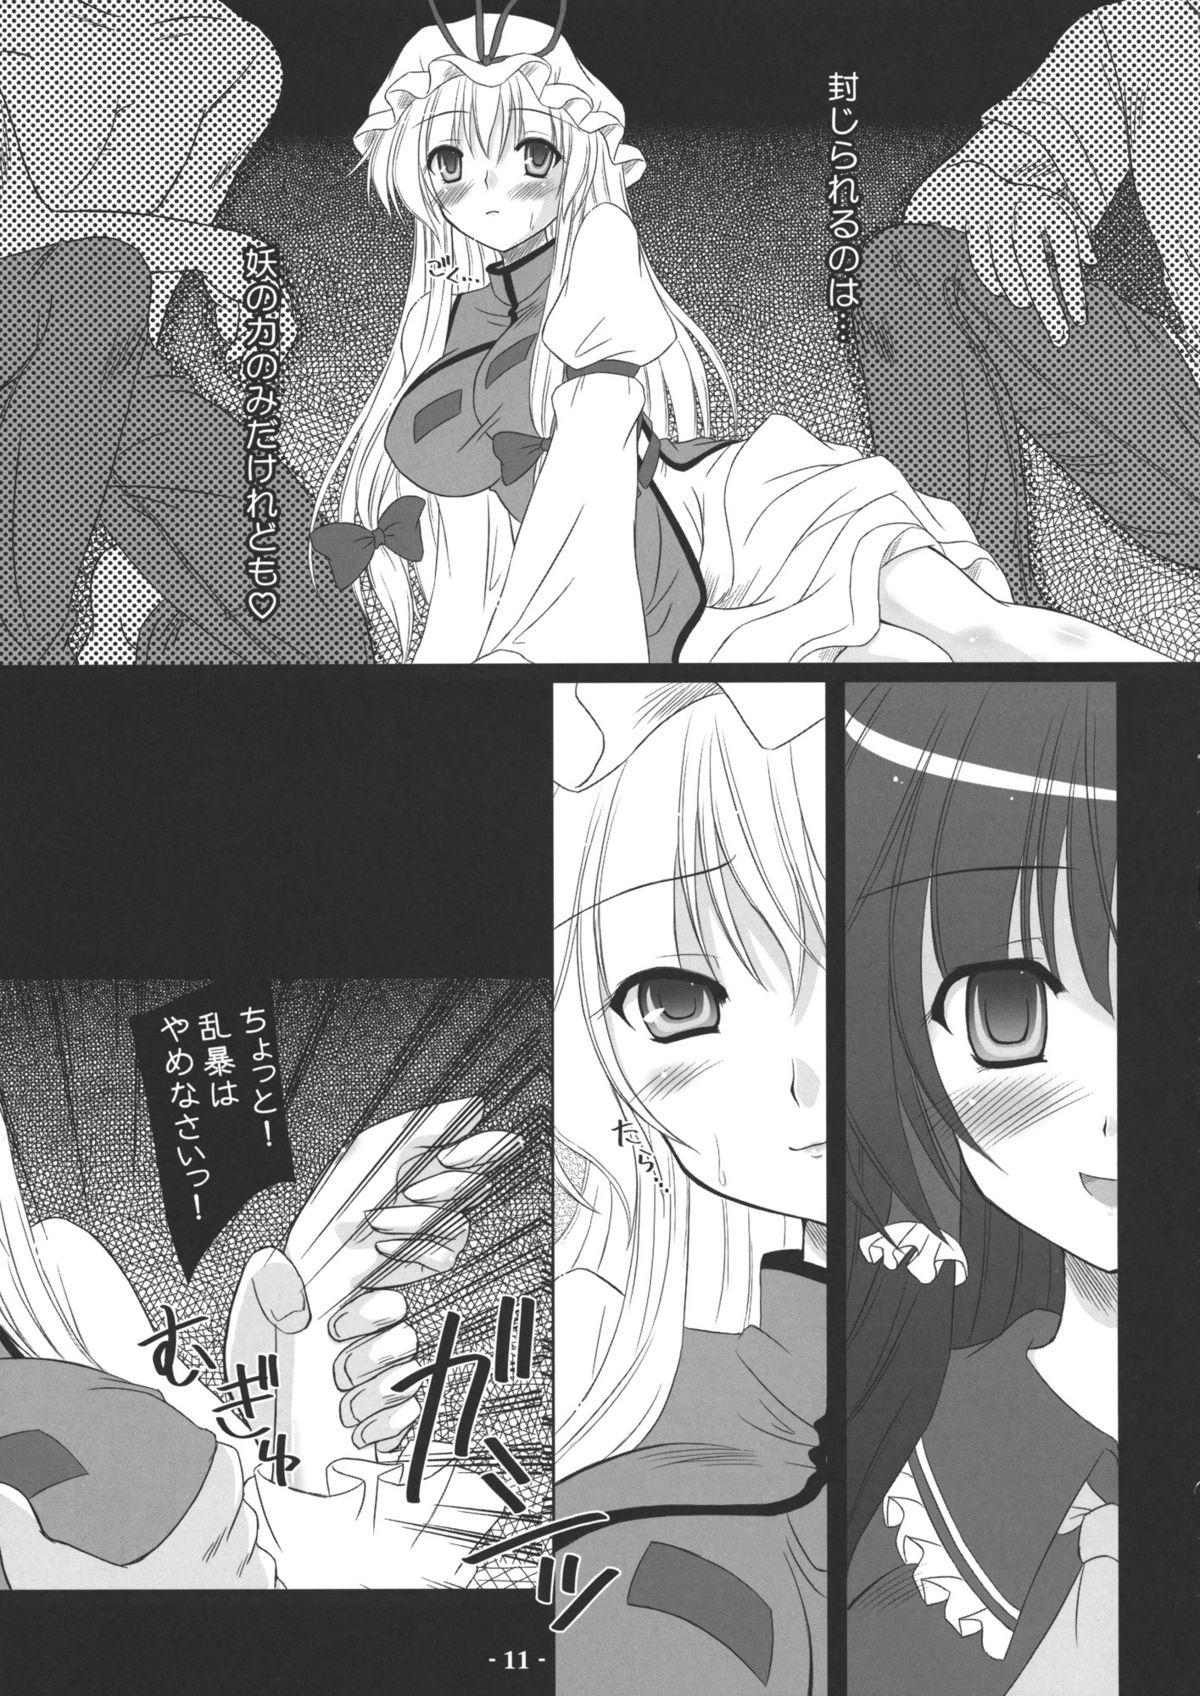 Hidden Camera Musou Fuuin - Touhou project Grandmother - Page 10